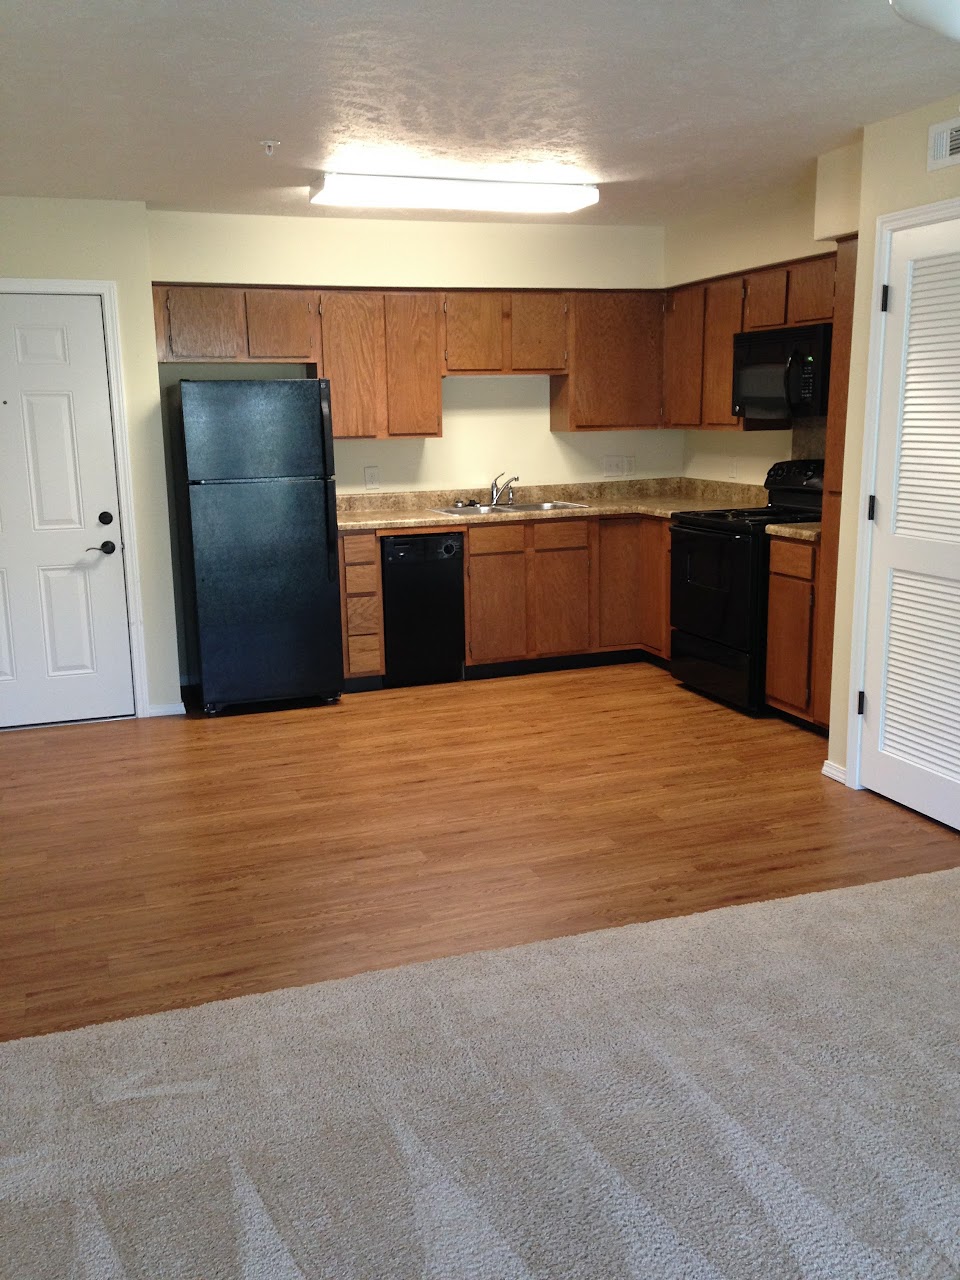 Photo of MAJESTIC VIEW APTS. Affordable housing located at 1628 MOUNTAIN VIEW DR HARRISON, AR 72601